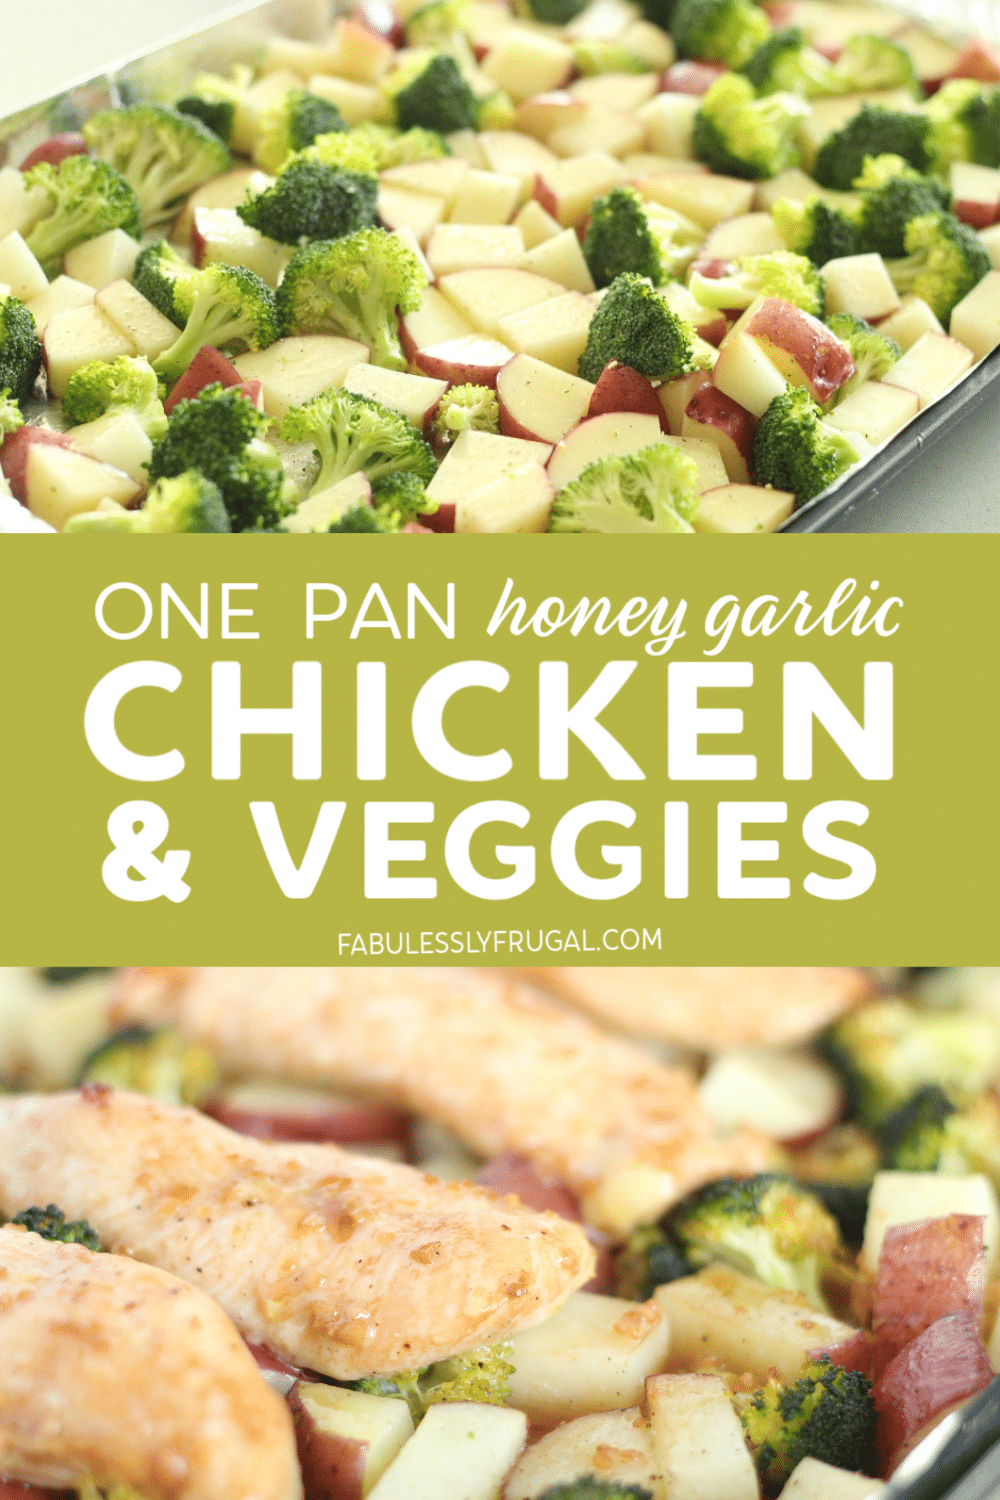 One-pan chicken potatoes and broccoli